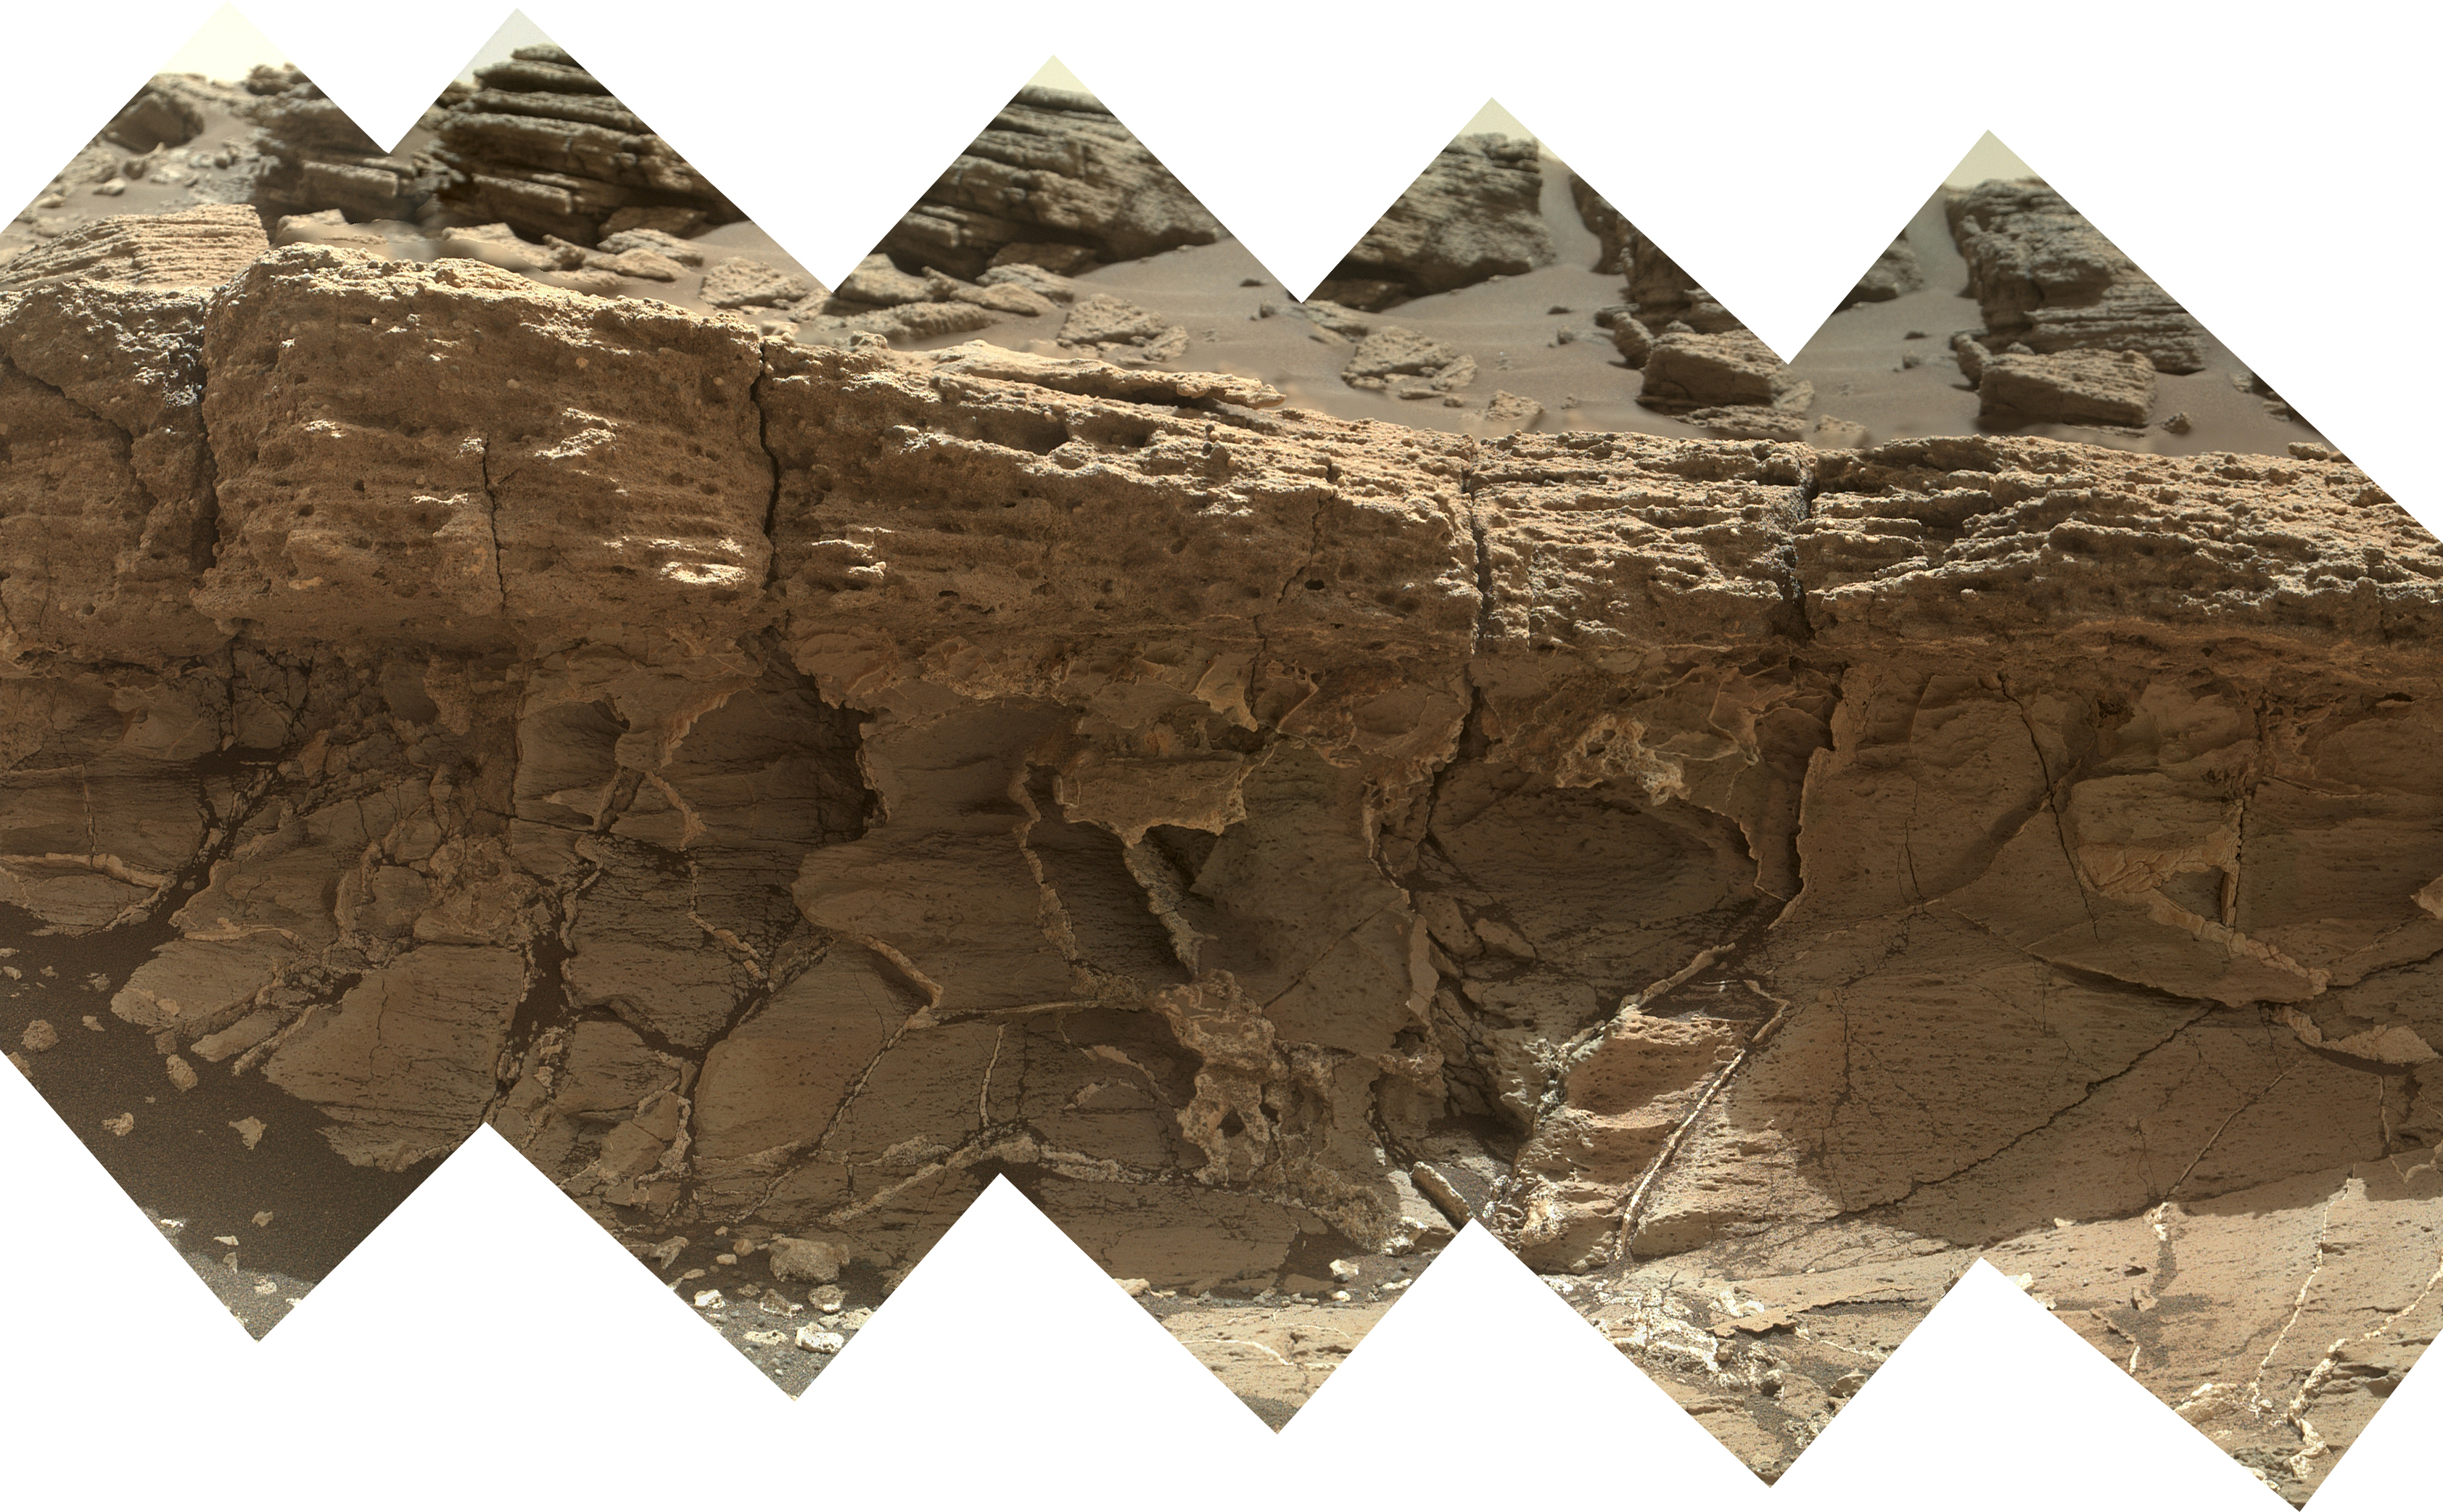 A rock outcrop dubbed "Missoula," near Marias Pass on Mars, is seen in this image mosaic taken by the Mars Hand Lens Imager on NASA's Curiosity rover.